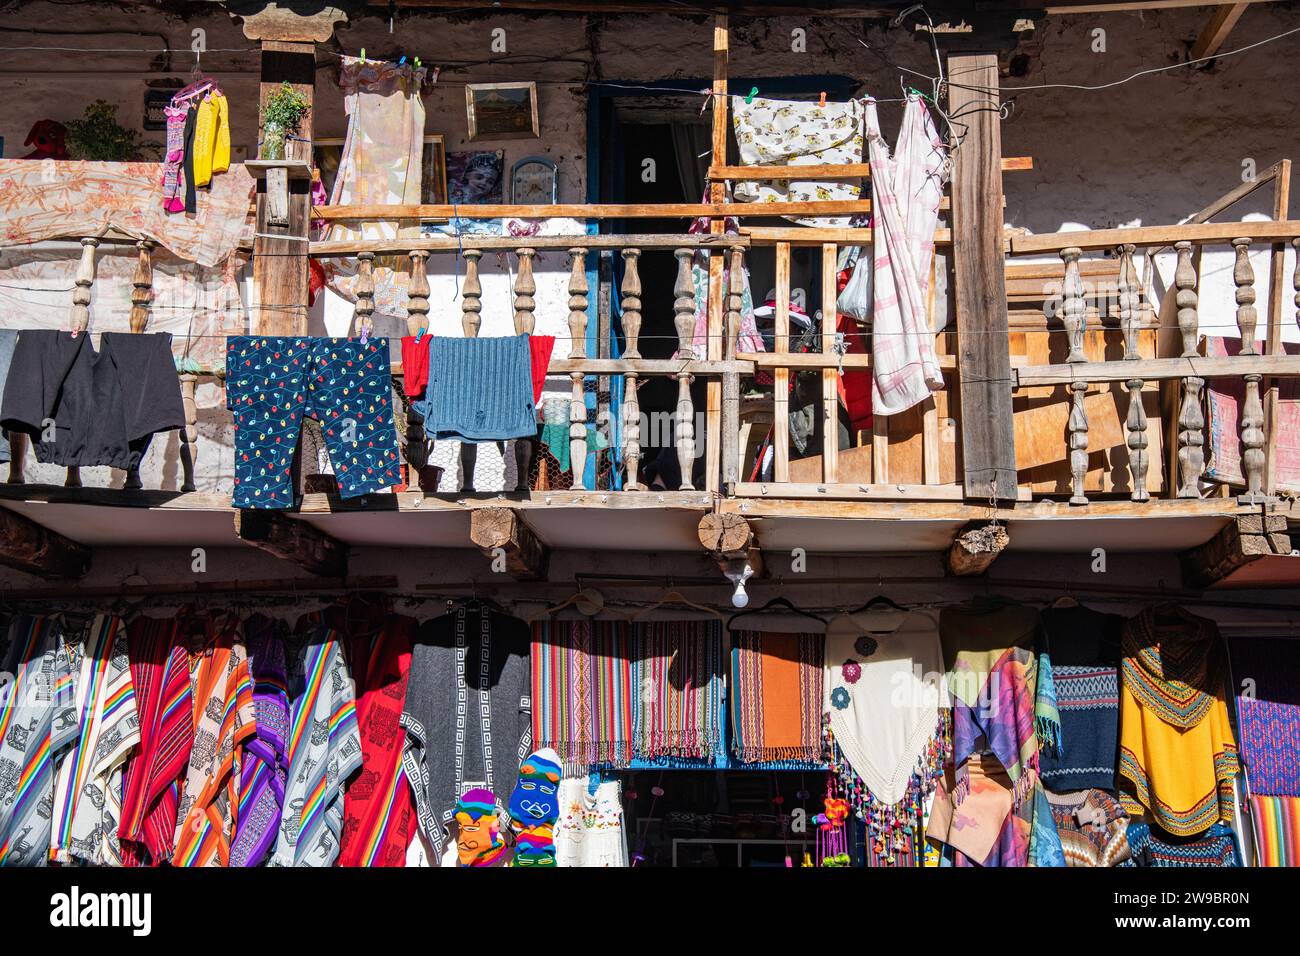 A local Peruvian's clothes / washing hanging on a balcony in Cusco, Peru Stock Photo